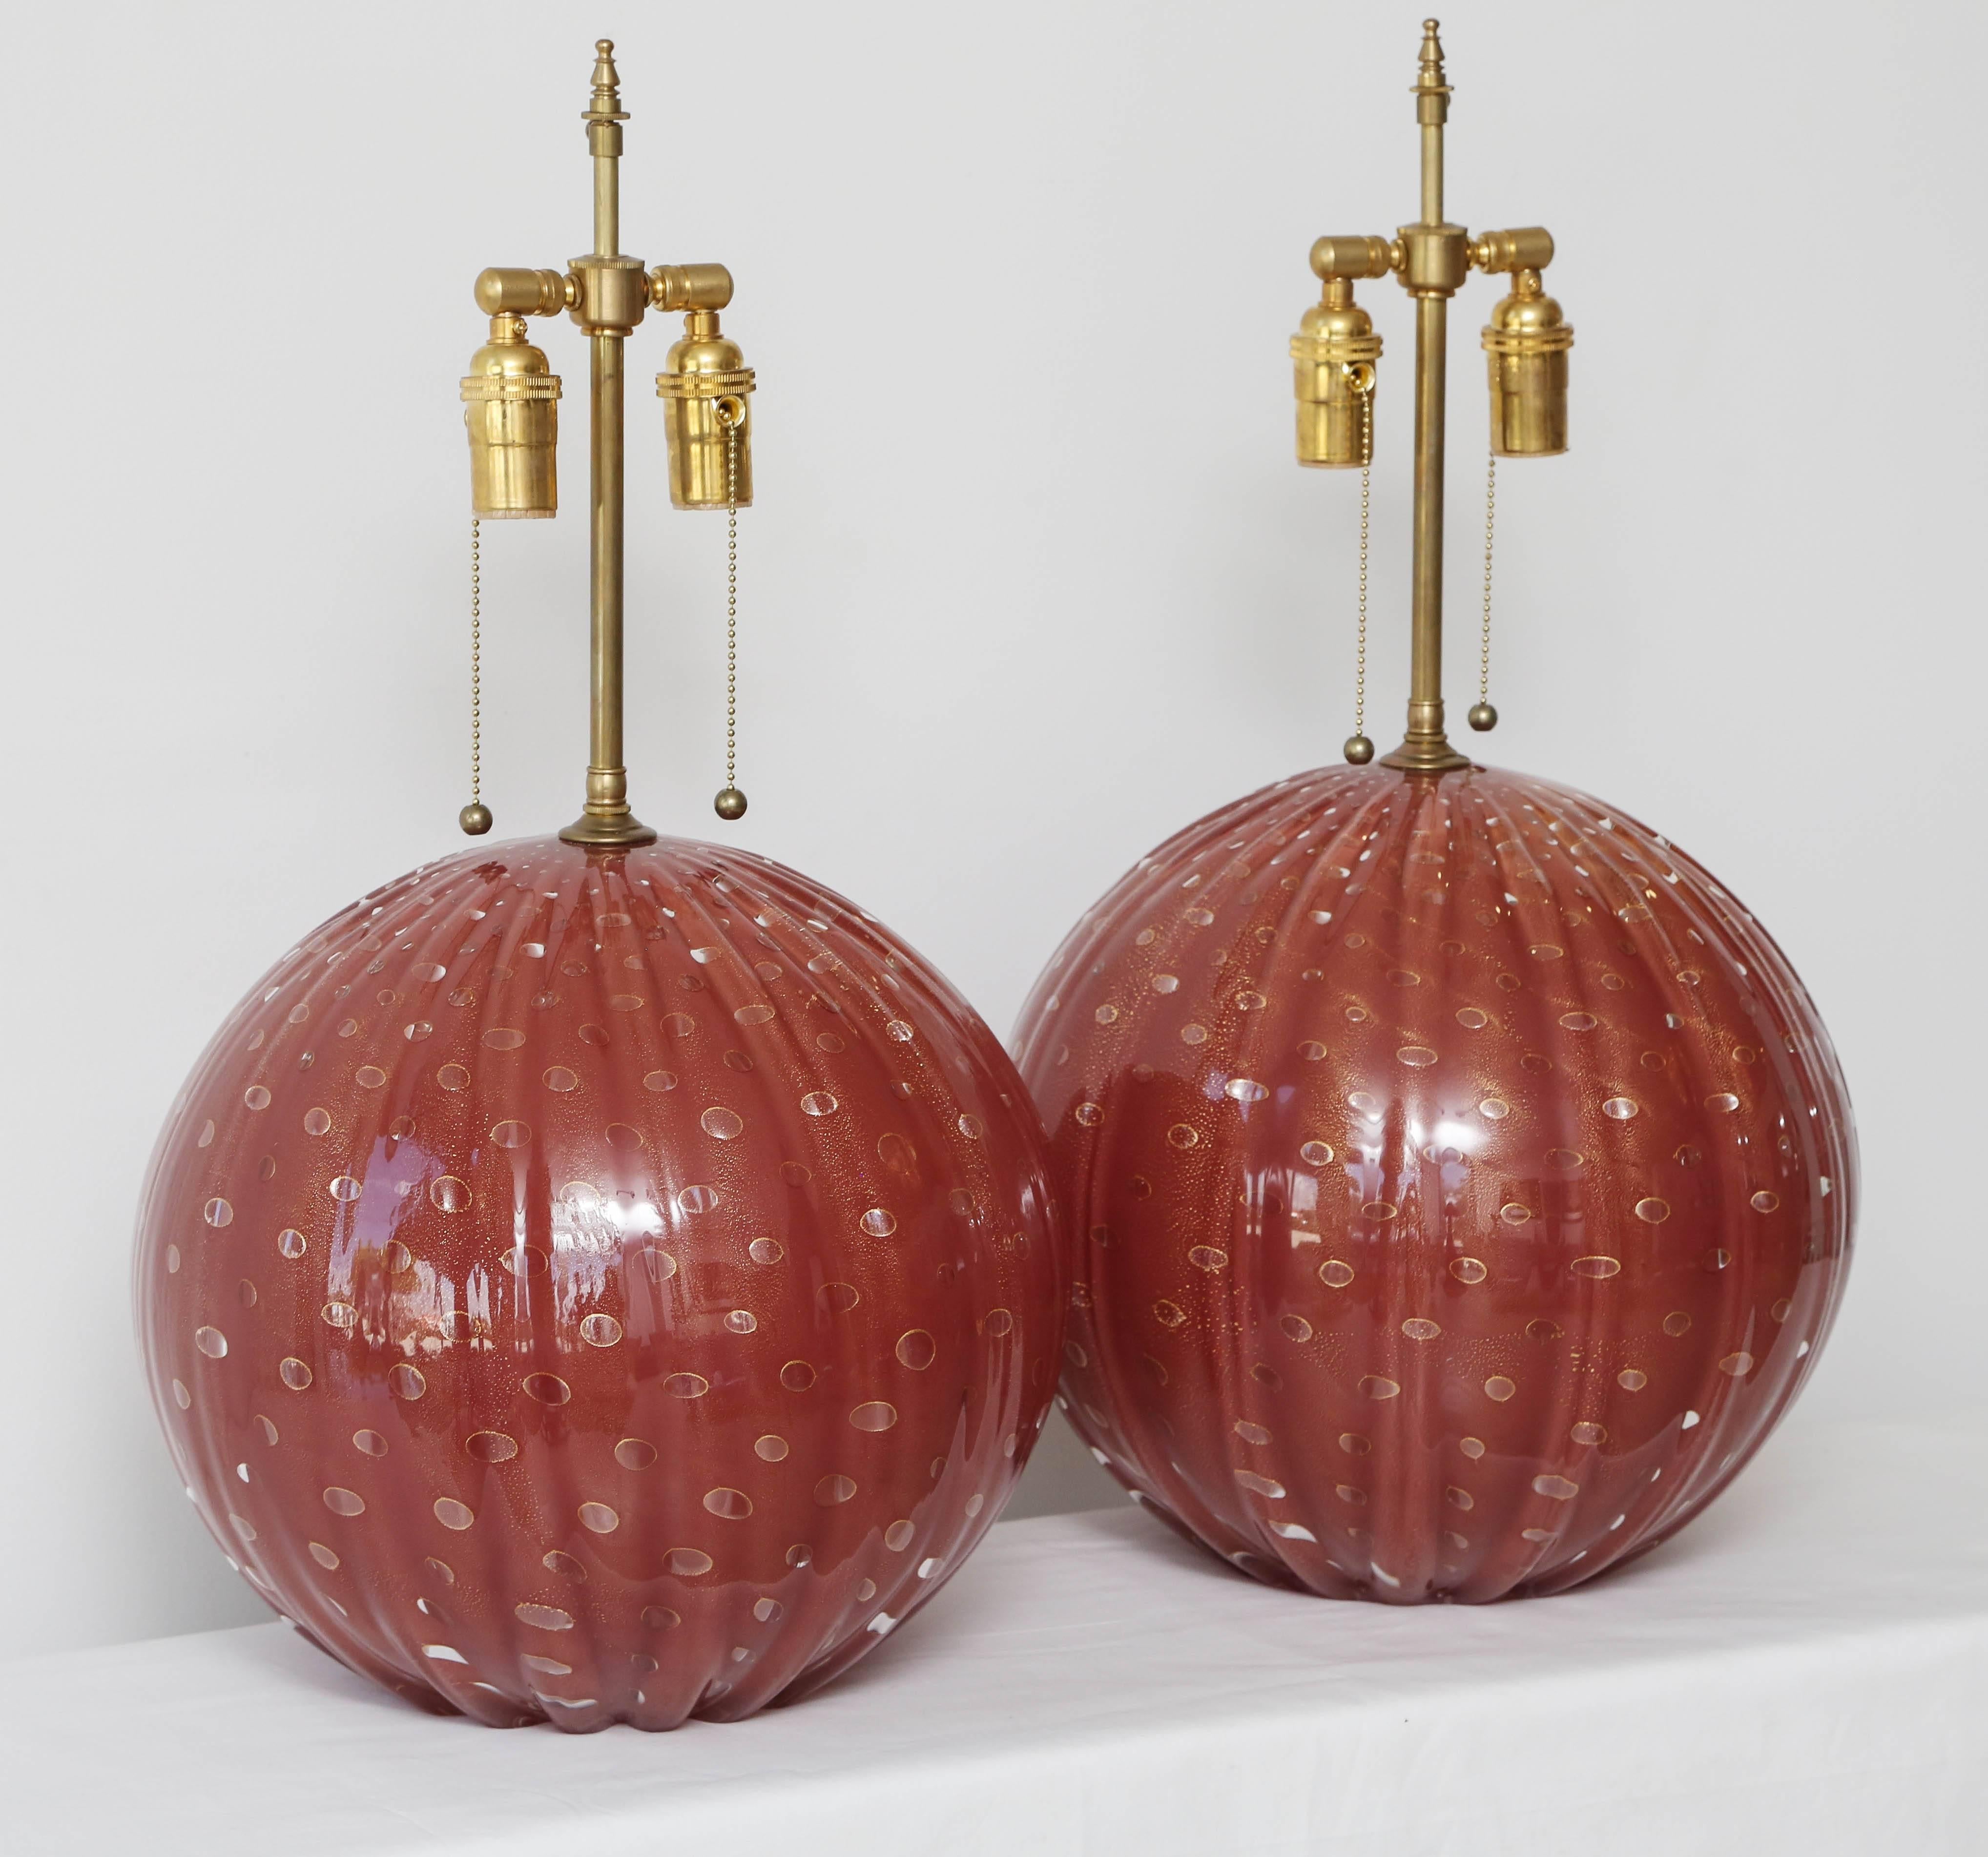 Pair of deep red fluted Murano glass lamps with controlled internal gold bubbles.